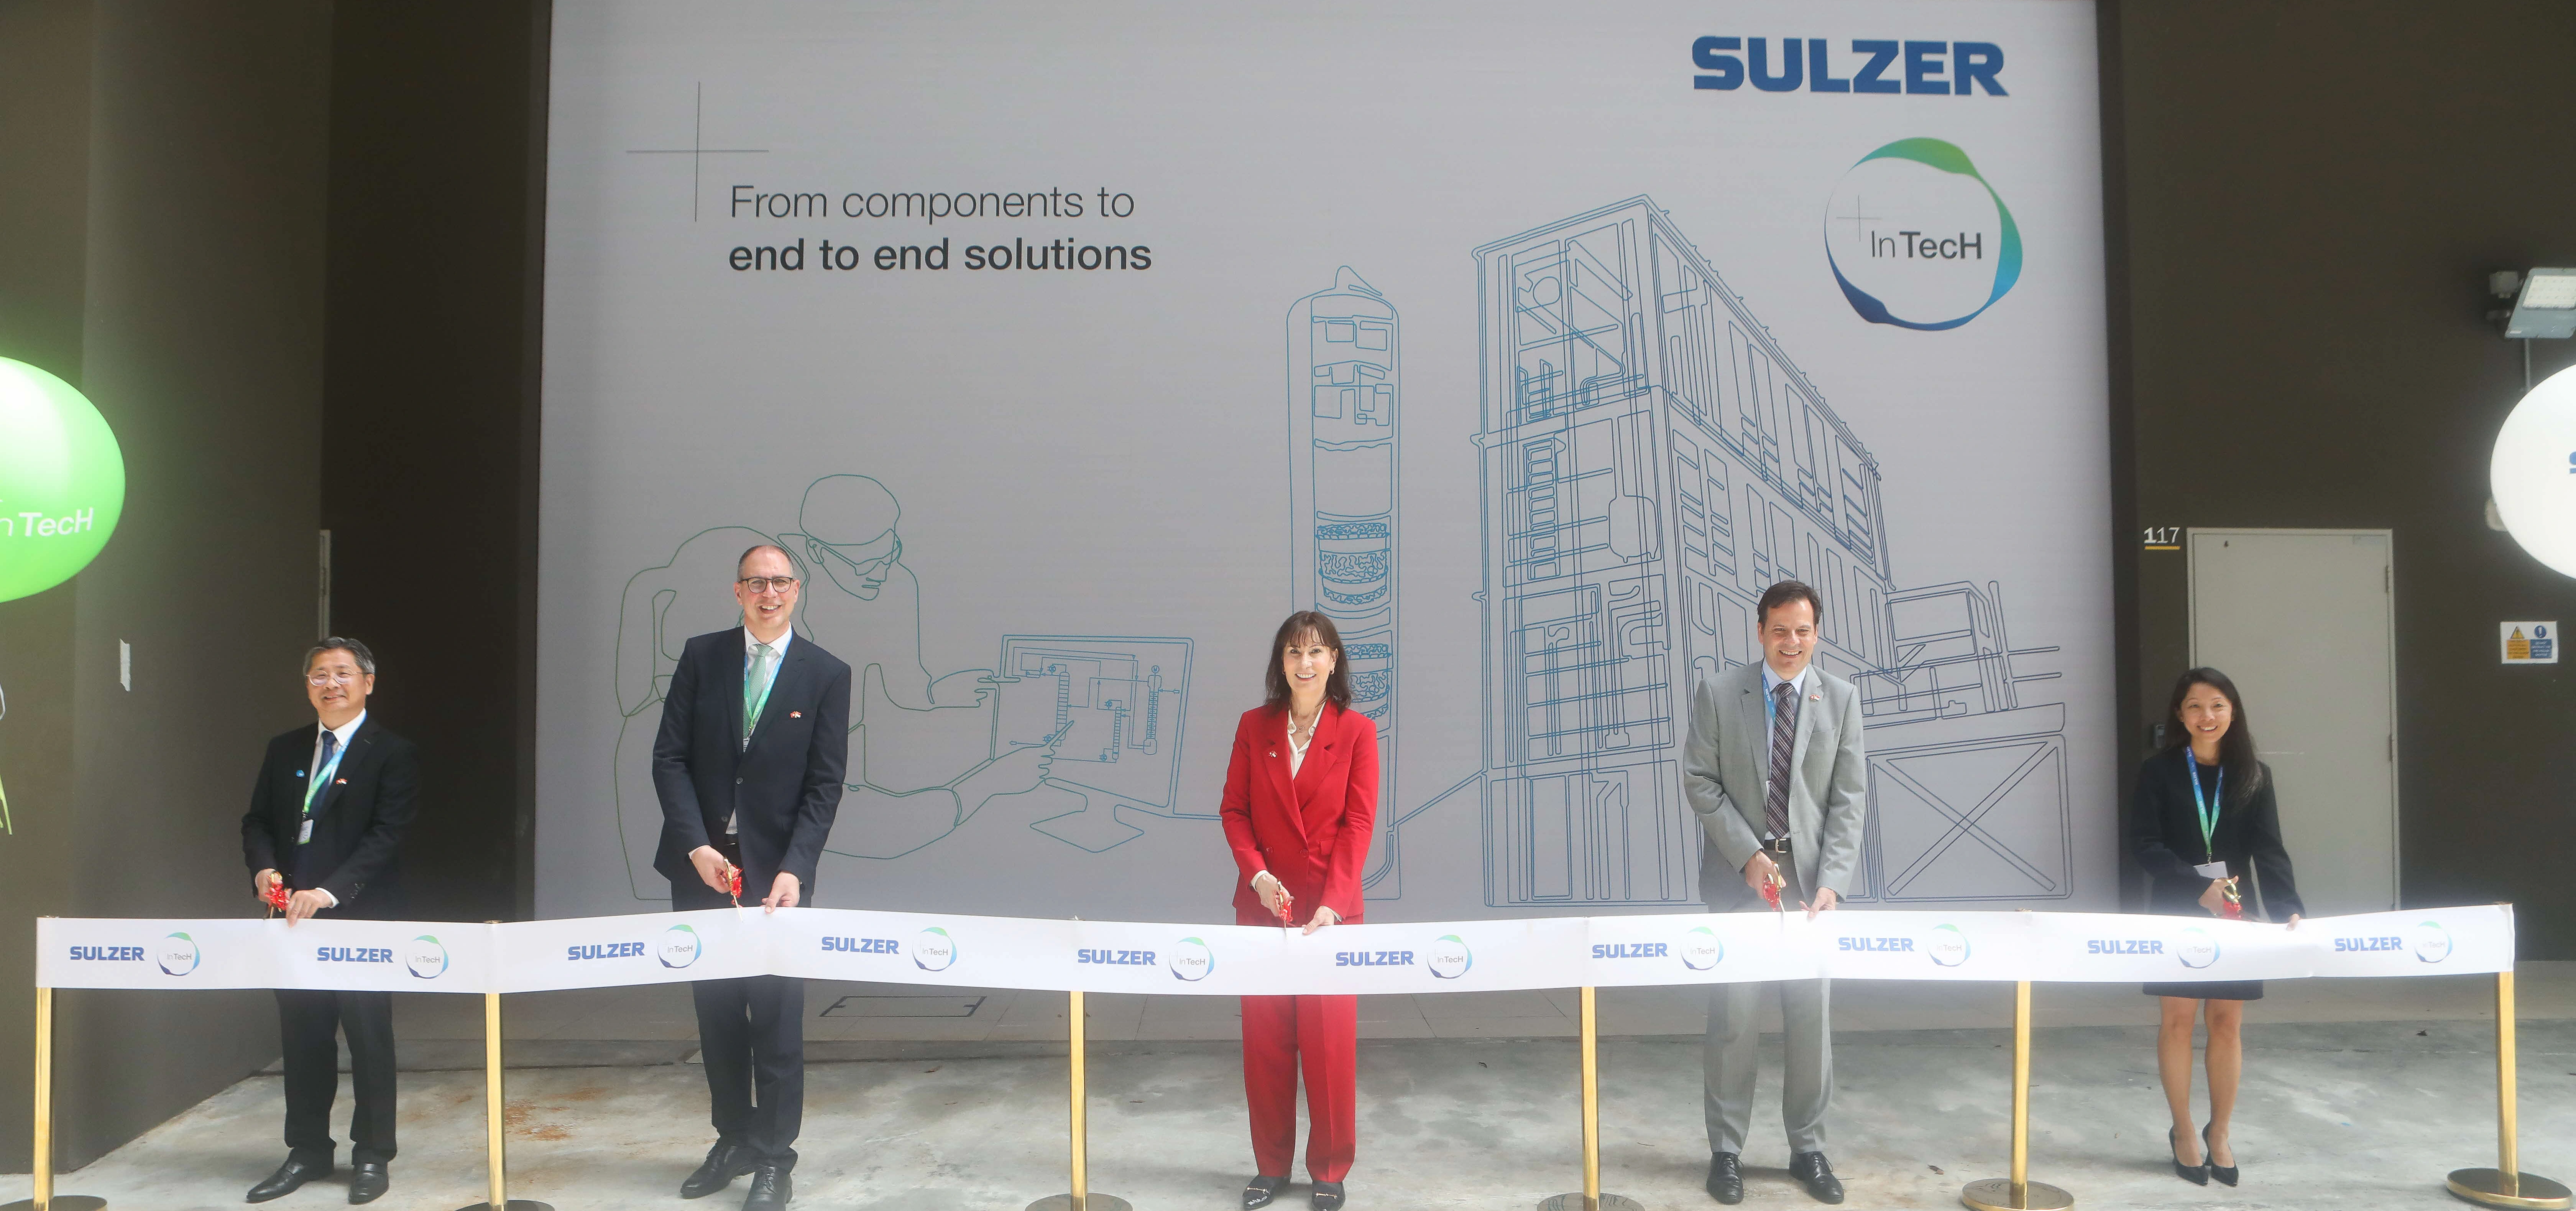 Sulzer inaugurates new cutting-edge Innovation Technology Hub in Singapore to support adoption of sustainable manufacturing in APAC